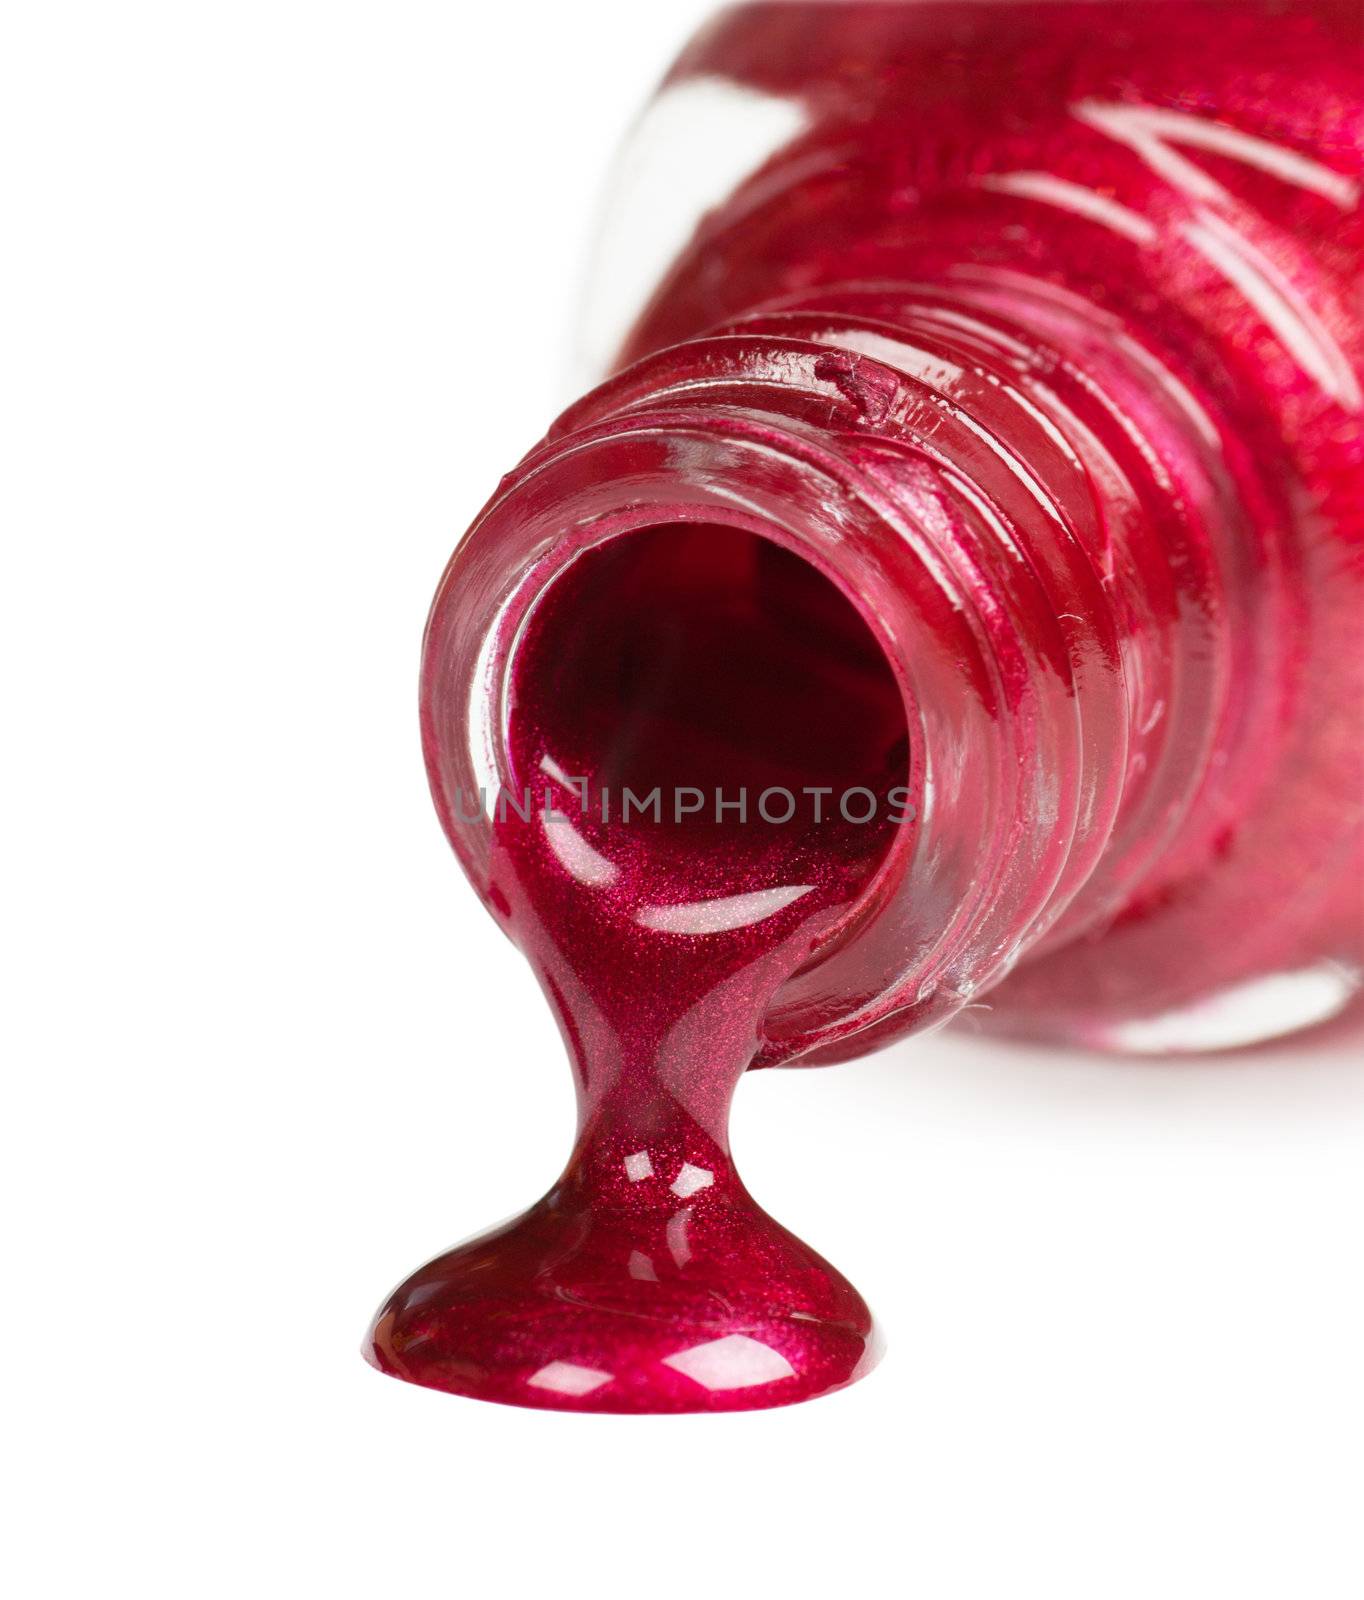 Red nail polish bottle spilled on a white background